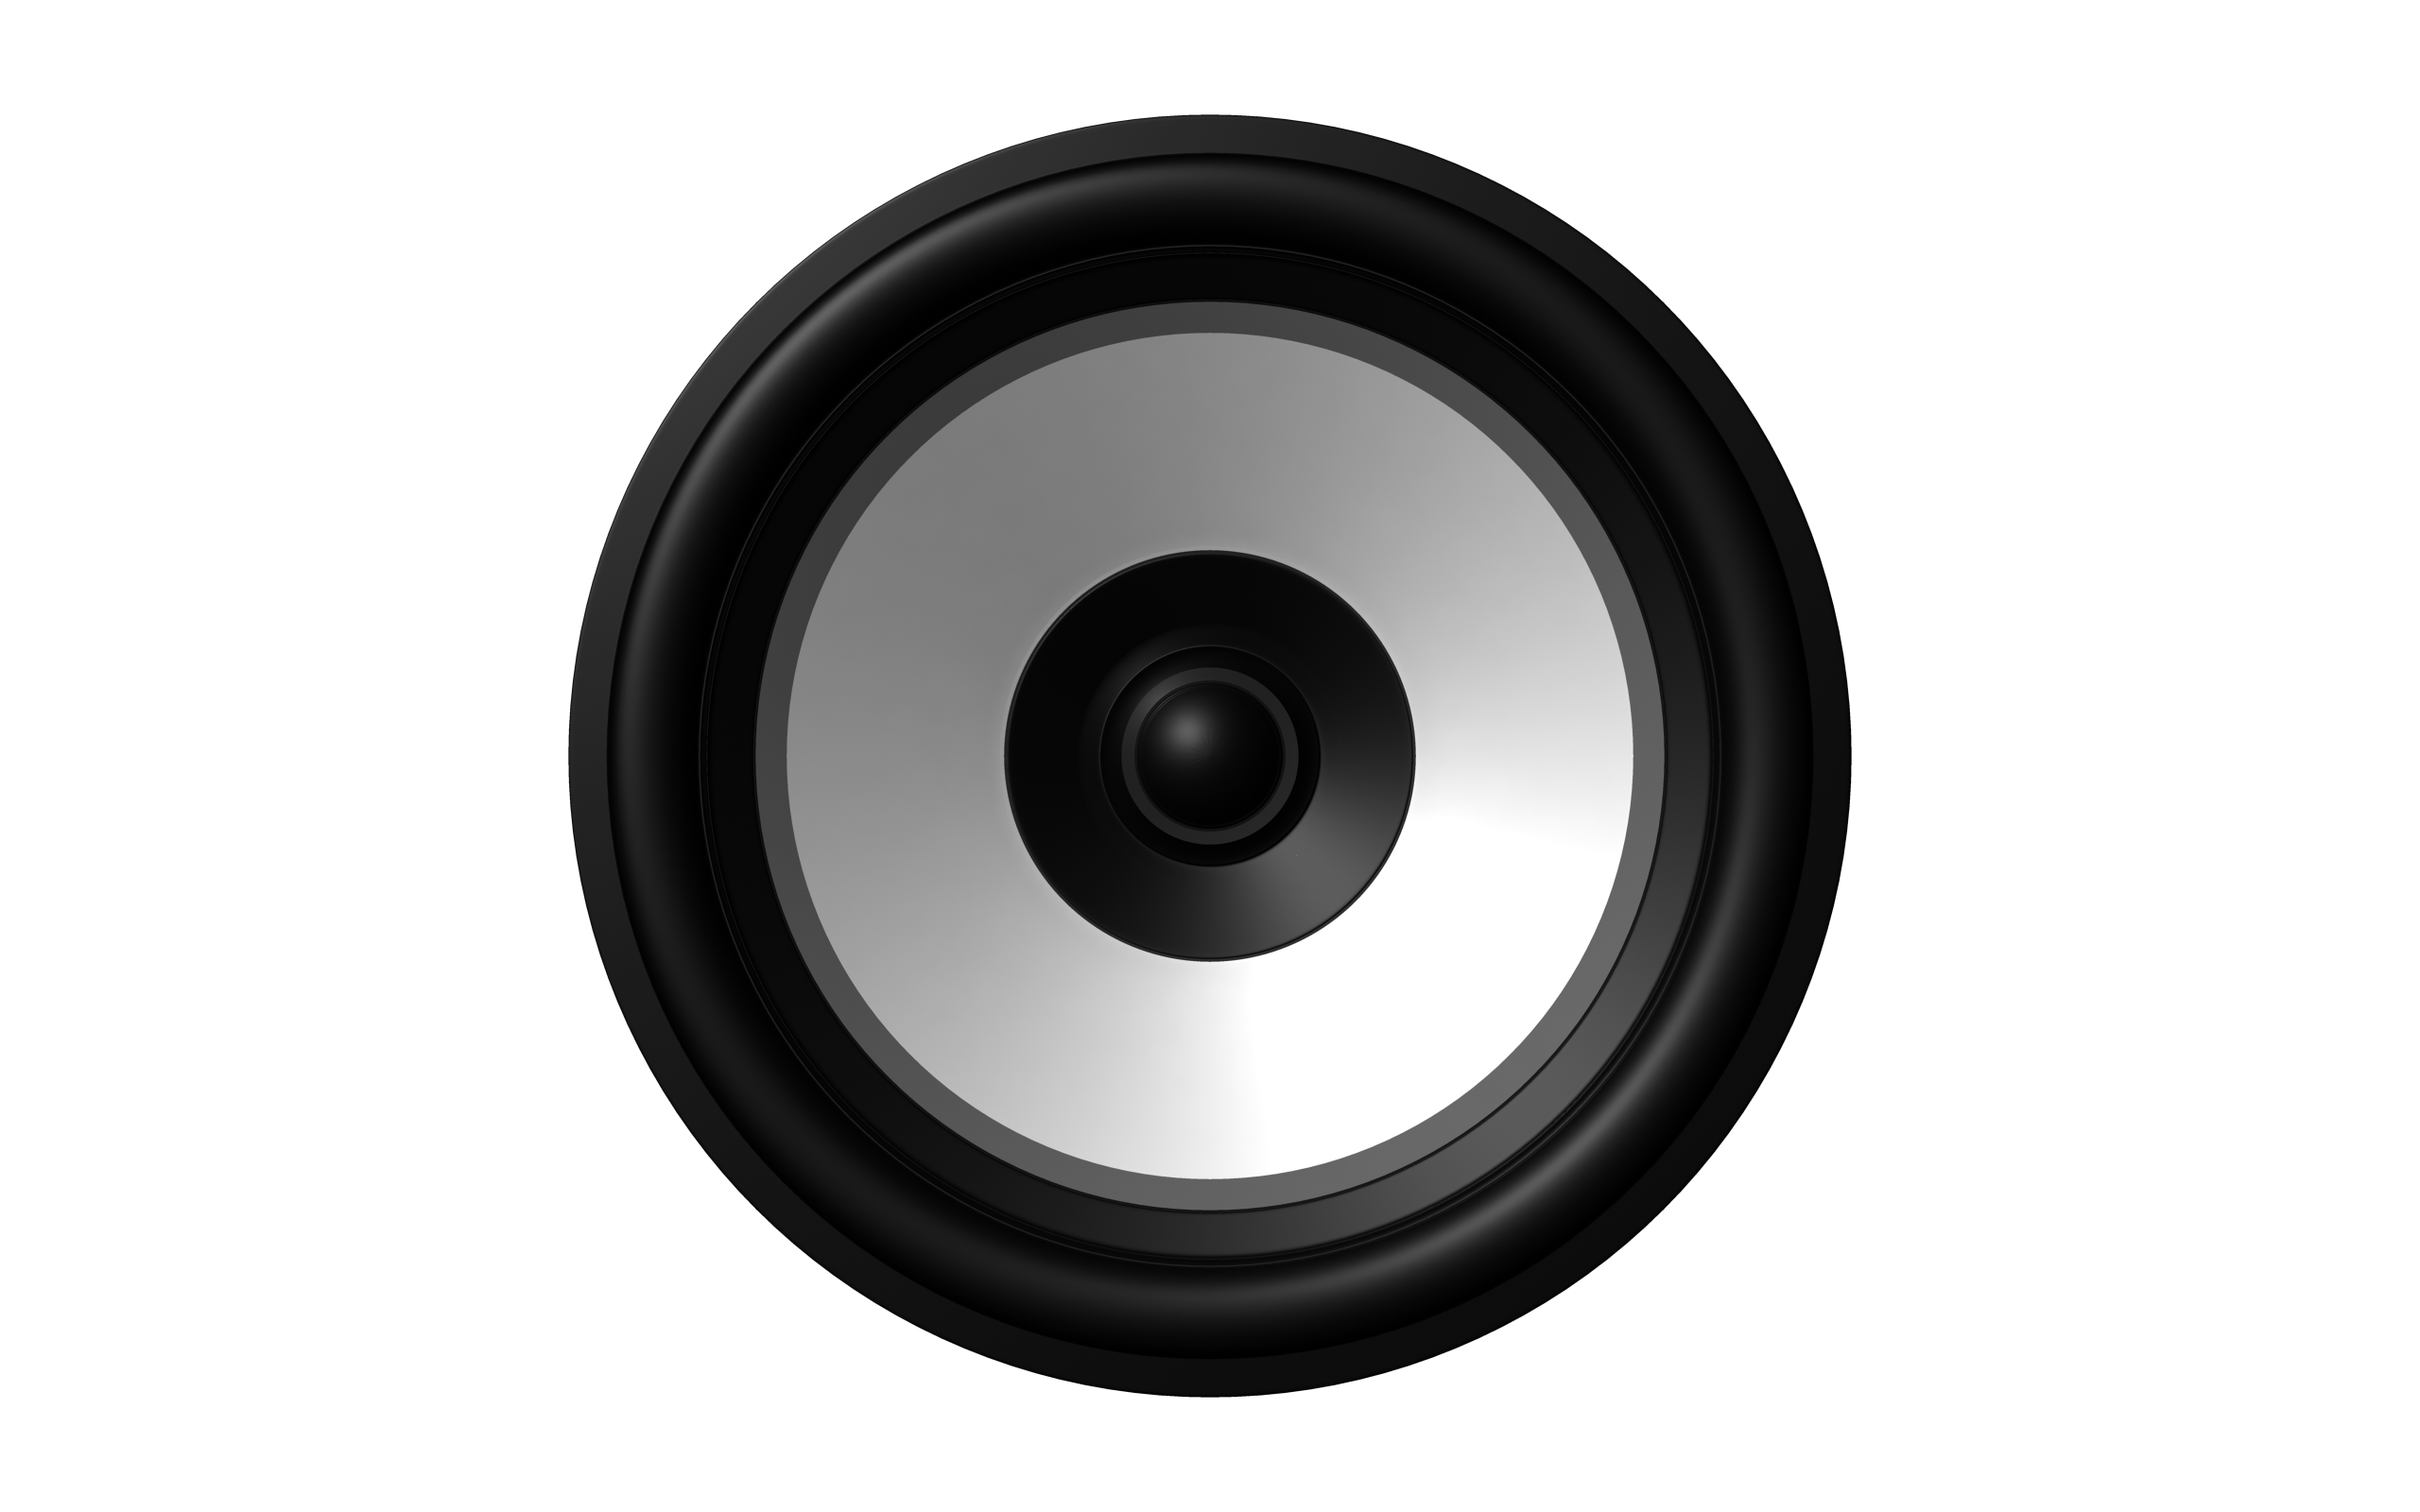 Audio speakers PNG images Download 